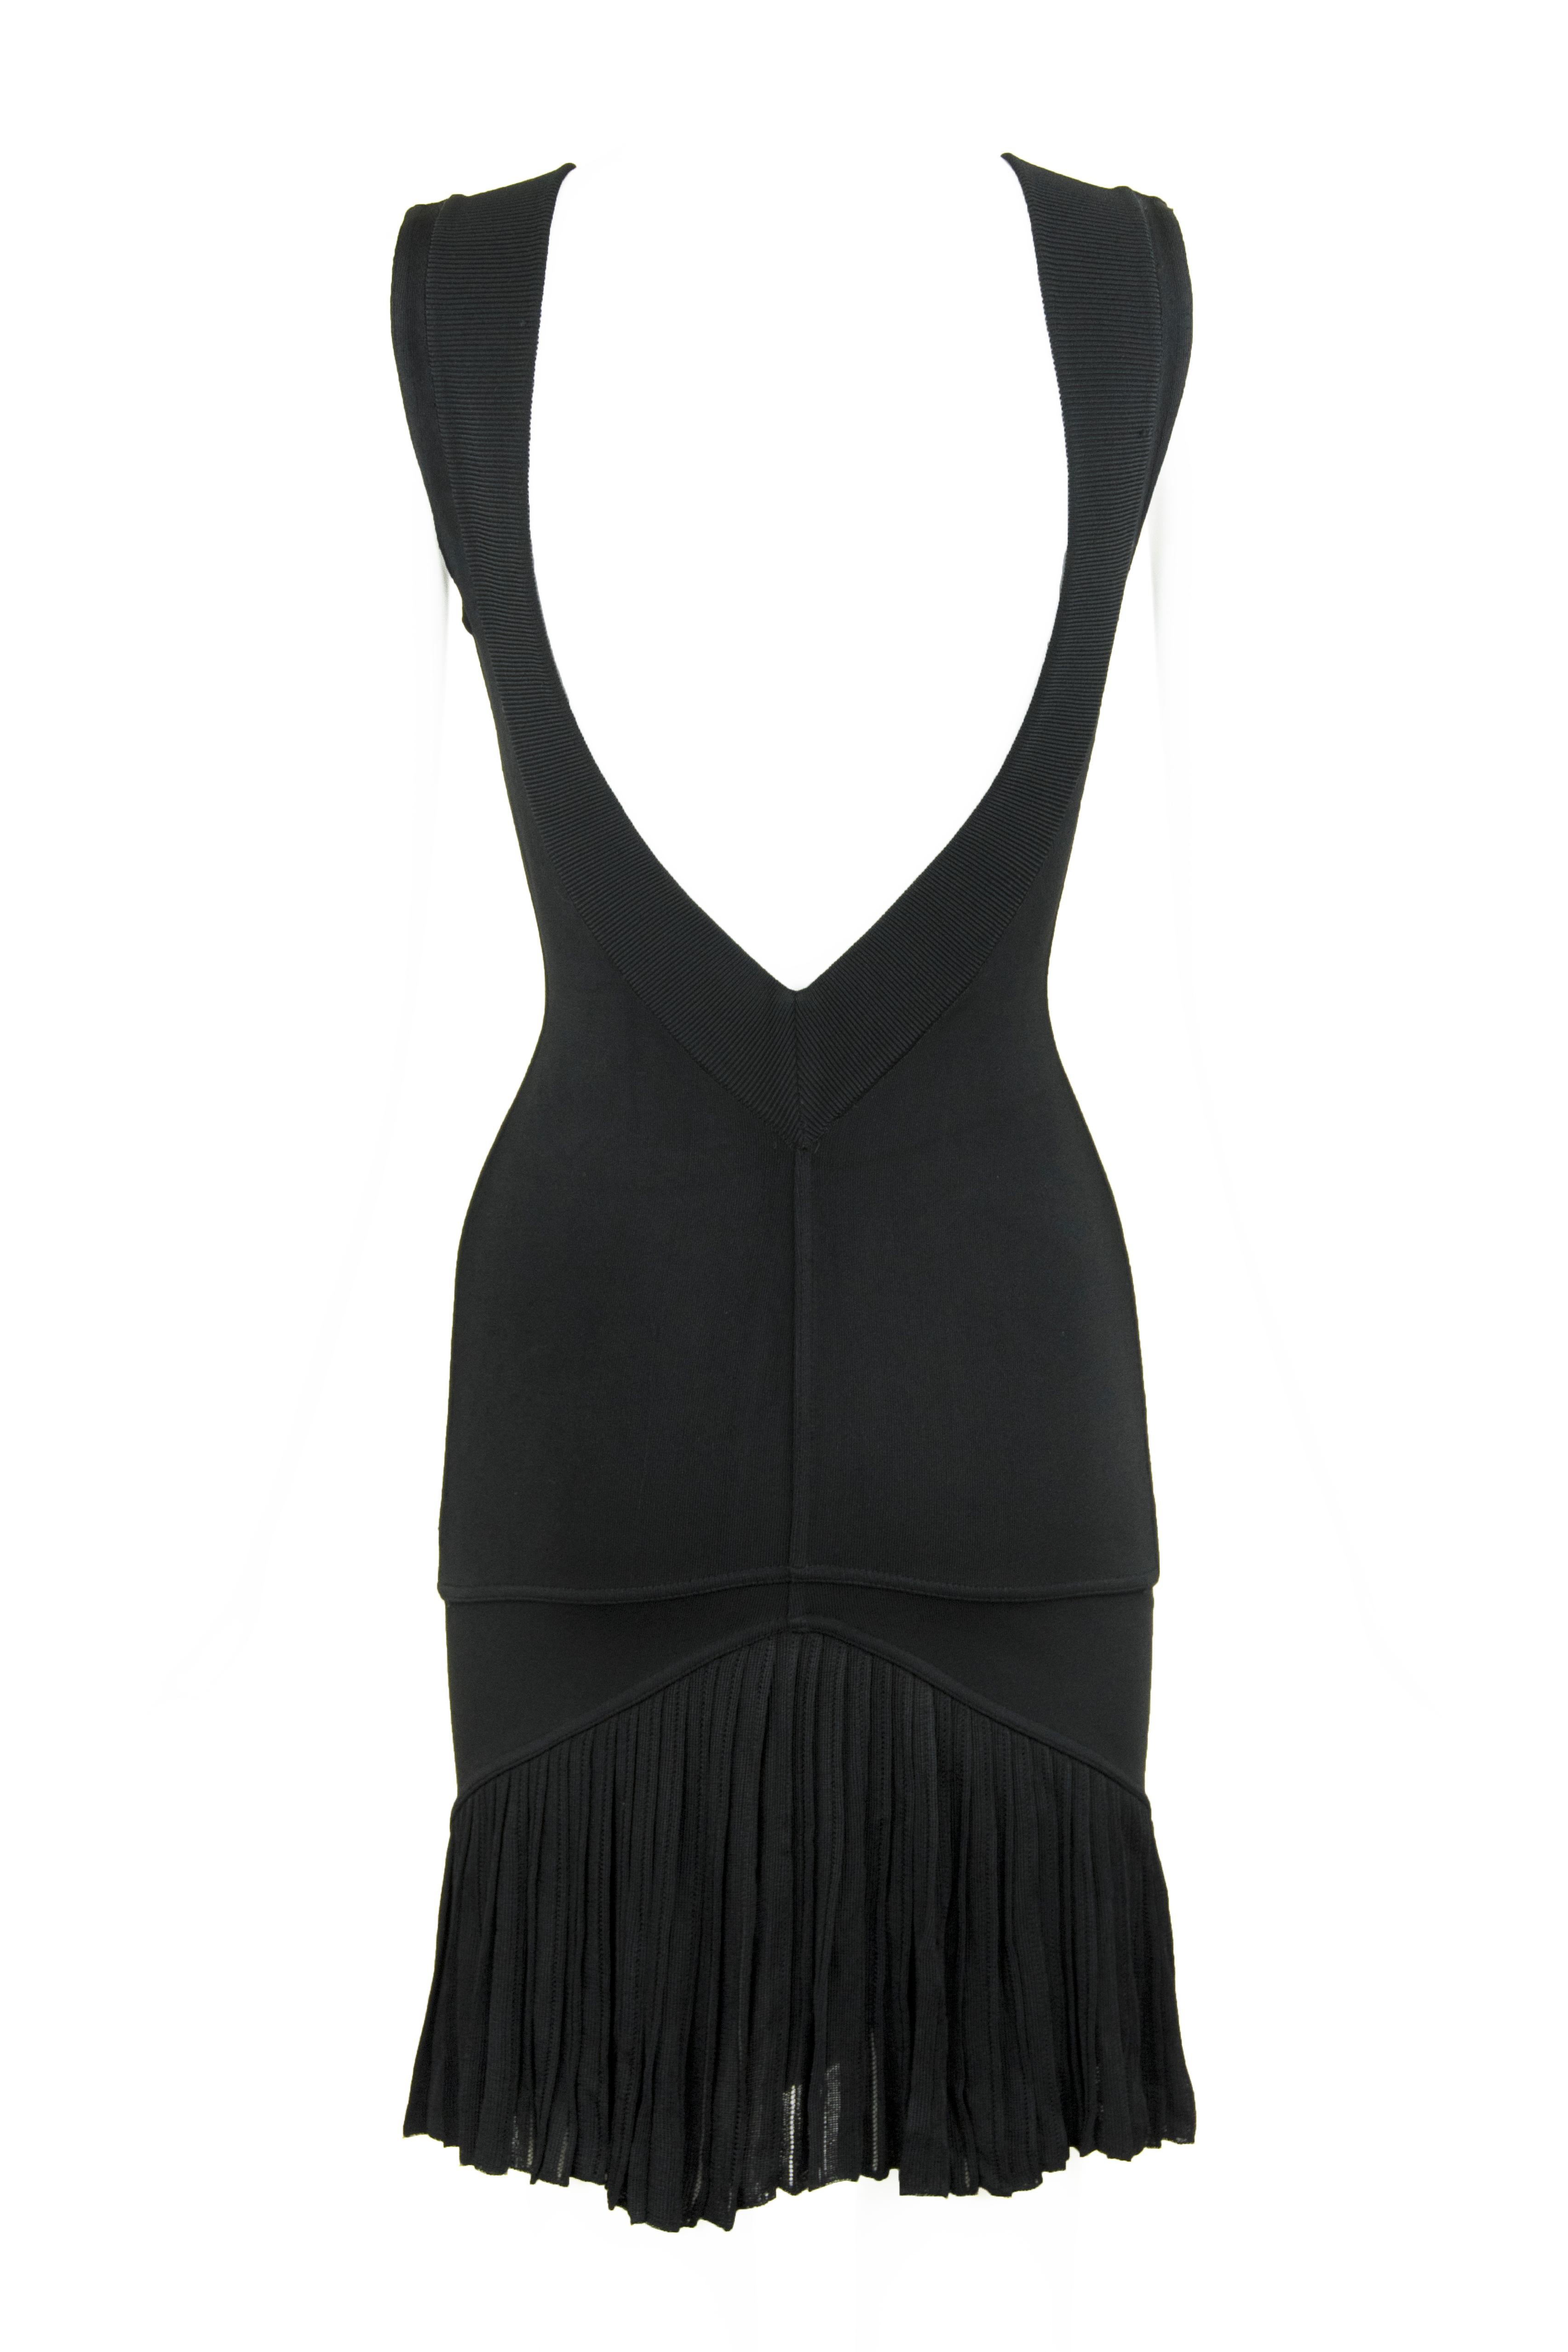 Vintage Alaia Black Knit Pleated Dress - Size XS In Excellent Condition For Sale In Newport, RI